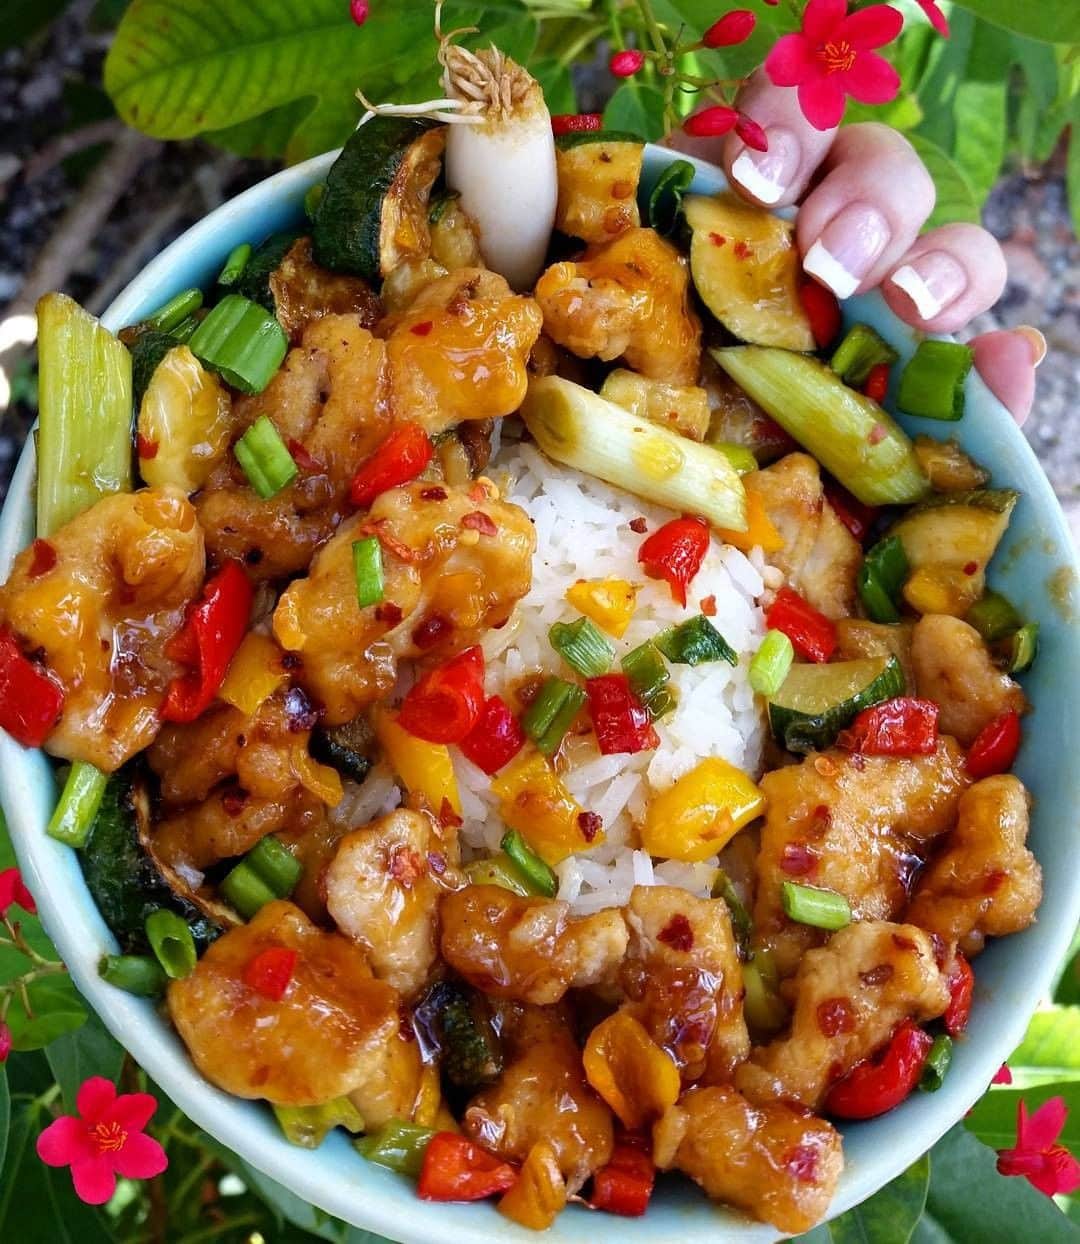 Flavorgod Seasoningsさんのインスタグラム写真 - (Flavorgod SeasoningsInstagram)「My Low Fat Sweet & Spicy General Tso's Asian ish Chicken⤵⤵⤵ Recipe. ⁠ -⁠ Customer:👉 @ky00000⁠ Made with:👉 #Flavorgod Lemon Garlic Seasoning⁠ -⁠ Build Your Own Flavor Bundle!⁠ Click the link in my bio @flavorgod ✅www.flavorgod.com⁠ -⁠ Your will Need:⁠ 2 Lg Organic Zucchini Chopped⁠ Or Sub Your Favorite Vegetables⁠ 2 Lg Green Spring Onions Chopped⁠ 1-2 Sweet Peppers⁠ 1-2 Spicy Chili de Arbol or Hot Peppers⁠ Cashews or Peanuts Optional.⁠ 1 Yellow Onion⁠ 1-2 TB @flavorgod Lemon Garlic⁠ Olive Oil Spray.⁠ •⁠ In a Wok or Any Non Stick Pan • Pan Sear all the above ingredients until Sweated or Lightly Golden. Remove From Pan to a Bowl.⁠ •⁠ 1-2 Chicken Breasts or Tofu Trimmed Chopped & Pounded out Roughly⁠ 2 TB Onion Powder (NOT onion Salt)⁠ 1 TB @Flavorgod Lemon Garlic Blend.⁠ •⁠ Roll Chicken in Spices to Coat as if It Were Flour. Make sure Pan is Fully Heated Medium-High & Sprayed with More Olive Oil before Adding Chicken to sear. Flip when Golden Brown. Cook Both Sides then Remove all Chicken & Place into the Bowl with Veggies.⁠ •⁠ General Tso Sauce:⁠ 1/4 C Honey⁠ 1/4 C Coconut Aminos or ⁠ Low Sodium Soy Sauce⁠ 3 TB Rice Vinegar⁠ 1 Clove Garlic Chopped⁠ 1 TB Finely Grated Ginger⁠ 3-6 Dried Chili de Arbol or any Fresh Spicy Pepper to Taste⁠ 1TB Tomato Paste⁠ 1-8 TB Sriracha. I Like a LOT⁠ •⁠ Starting with Garlic & Ginger Add to Same Pan • Cook For a few Min's • then add All the Rest of the Sauce ingredients. Warm Gently.⁠ •⁠ Add All the Chicken & Veggies back into the Pan with the Sauce. Gently Fold into Sauce. Heat Through with Lid on for a Few Minutes. ⁠ Serve on Steamed Jasmine Rice. •⁠ My Whole Platter on ➡ Previous Post was Made with Just One Chicken Breast BTW & I didn't even Use it all For the Photo.⁠ •⁠ Organic Produce & Free Range Chicken From @wholefoods. Zucchini From @publix. Lemon Garlic & Pink Himalayan Salt & Pepper From @flavorgod Seasonings⁠ ⁠ ⁠ -⁠ #food #foodie #flavorgod #seasonings #glutenfree #mealprep  #keto #seasonings #paleo  #seasonings  #kosher #seasonings  #breakfast #lunch #dinner #yummy #delicious #foodporn ⁠ ⁠」9月23日 8時00分 - flavorgod